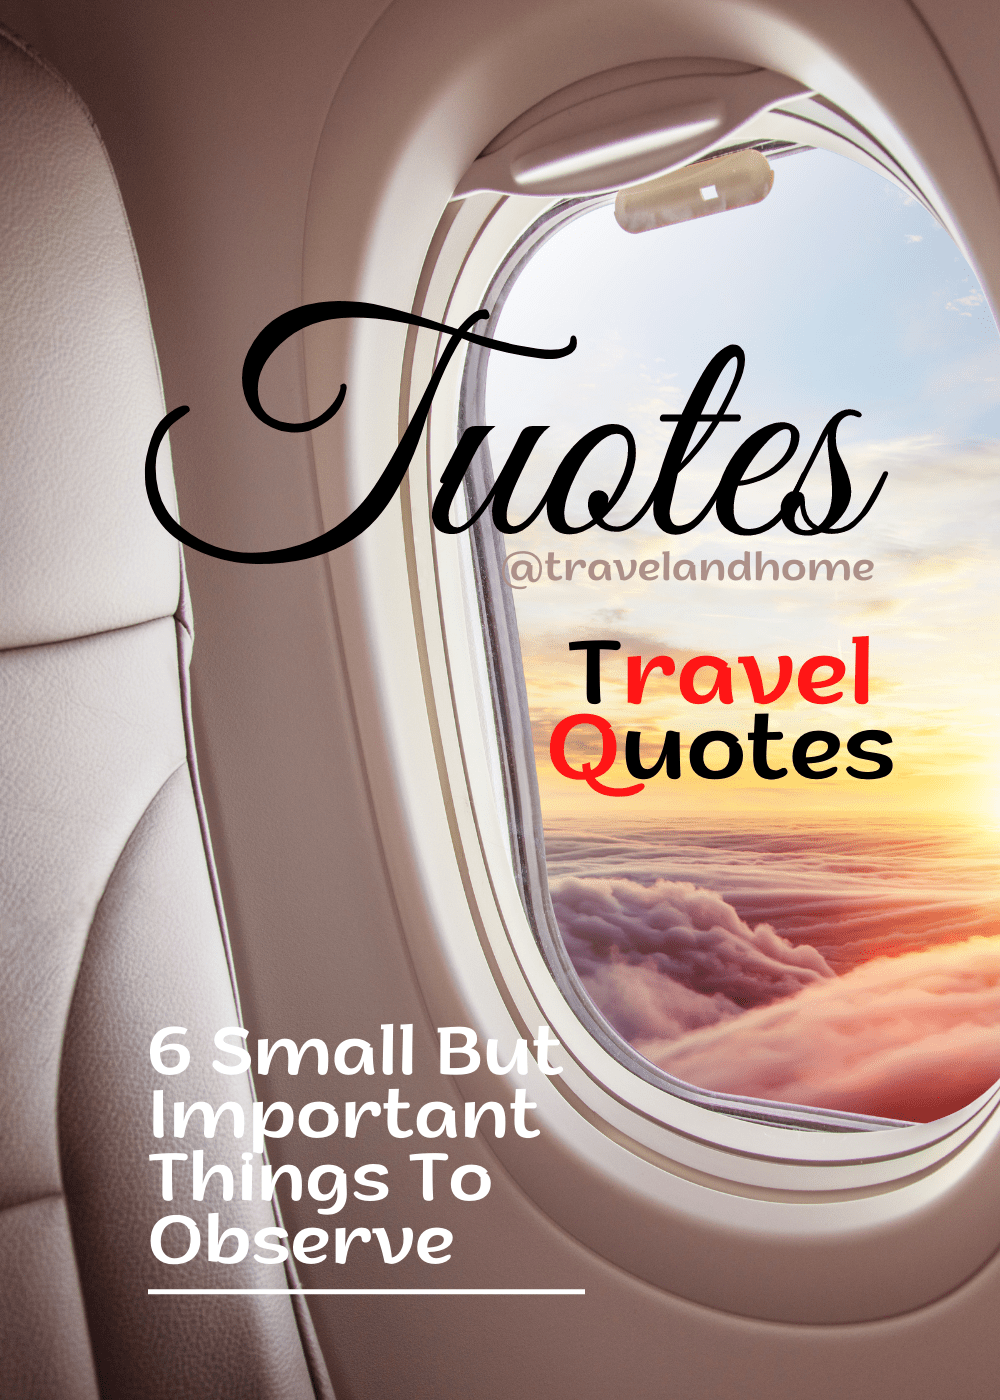 the meaning of the word tuotes new words fun words most popular and inspirational travel quotes min